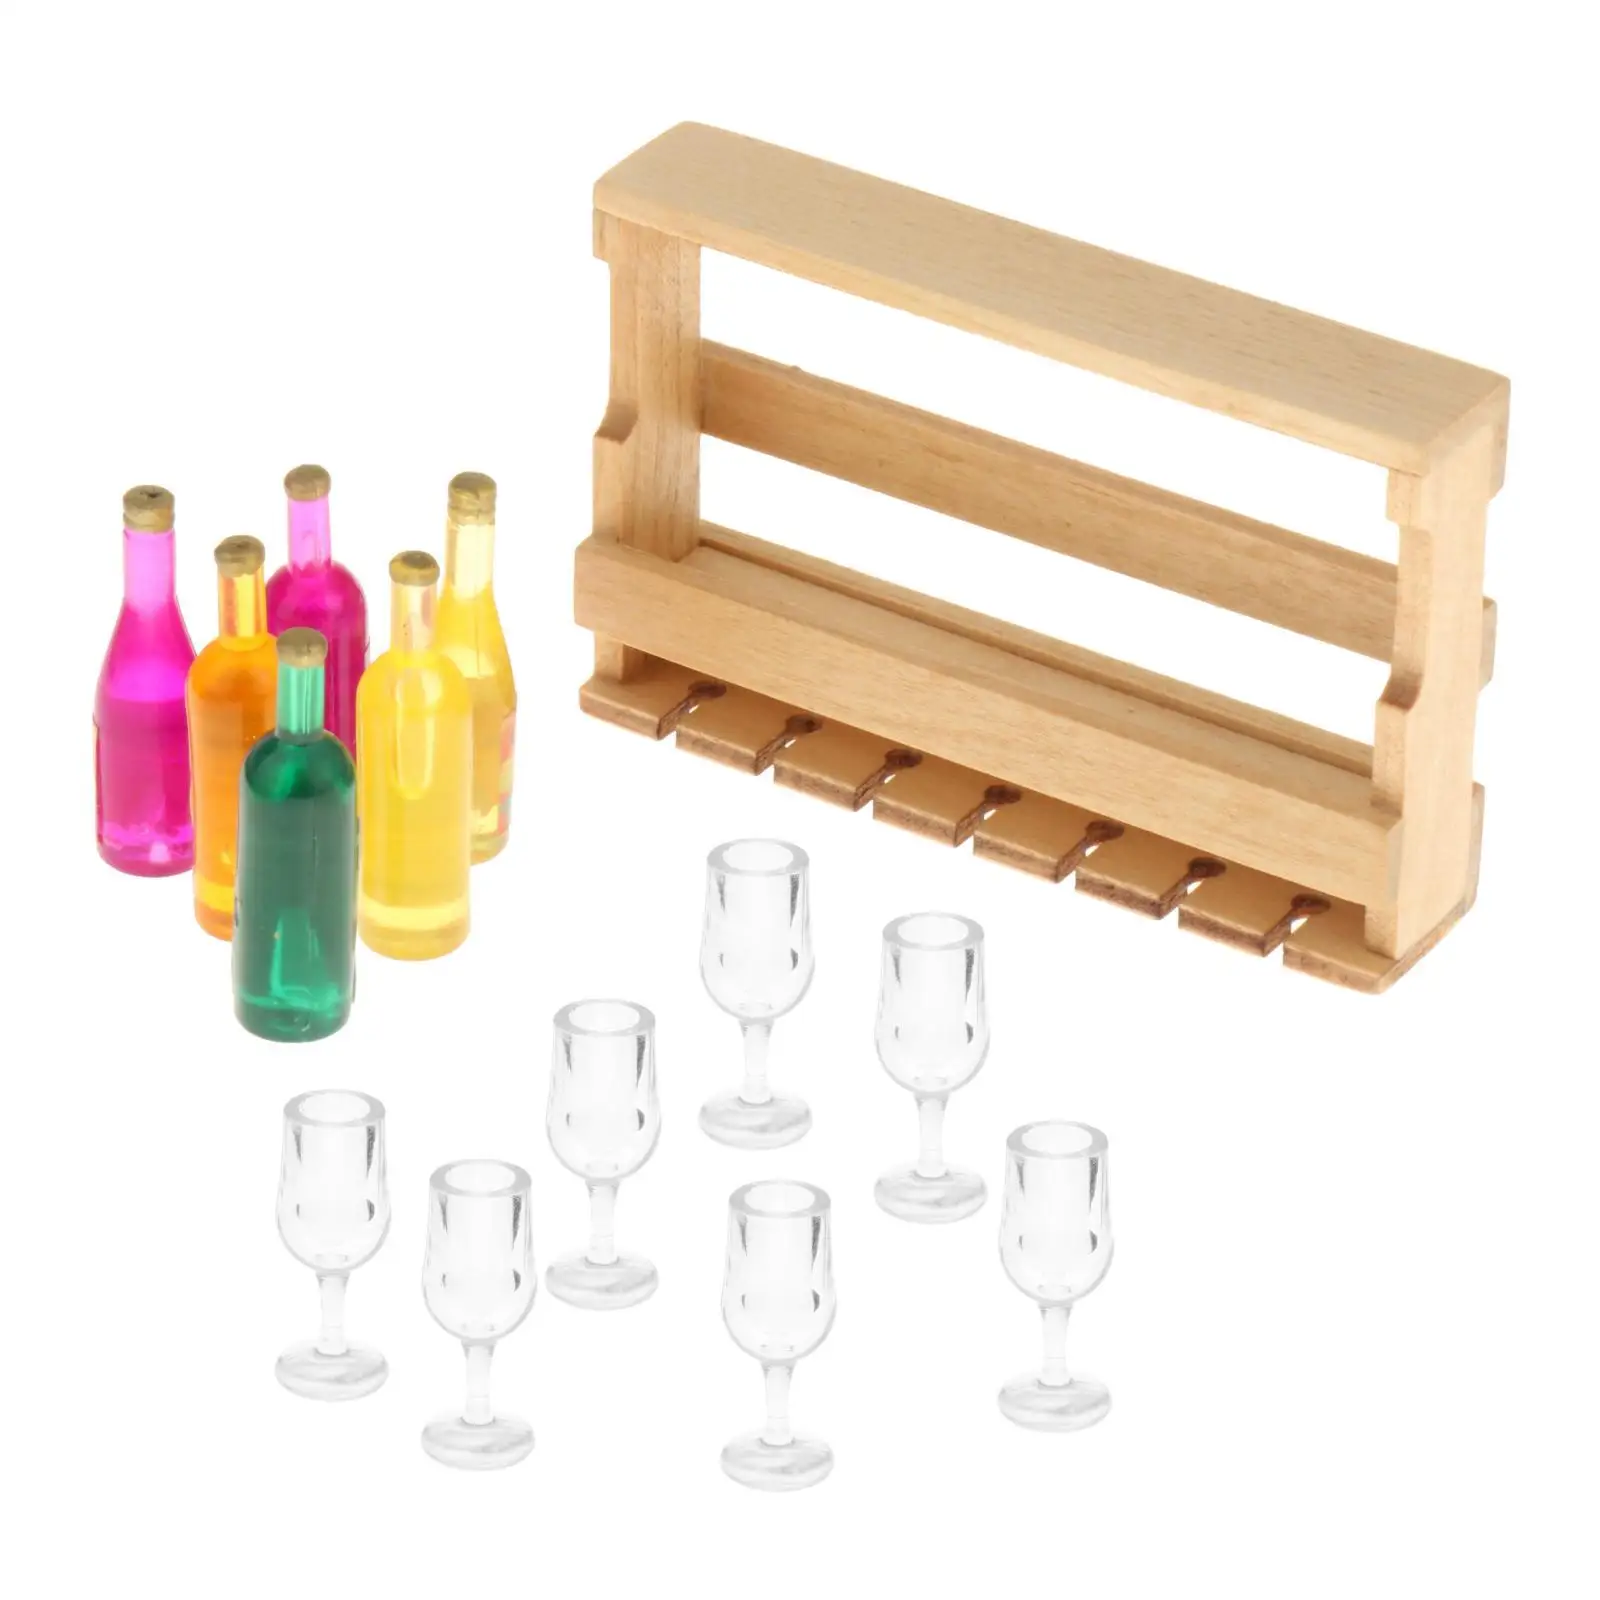 14x 1/12 Scale Miniature Wine Rack with Bottles and Glass Cup for Kitchen